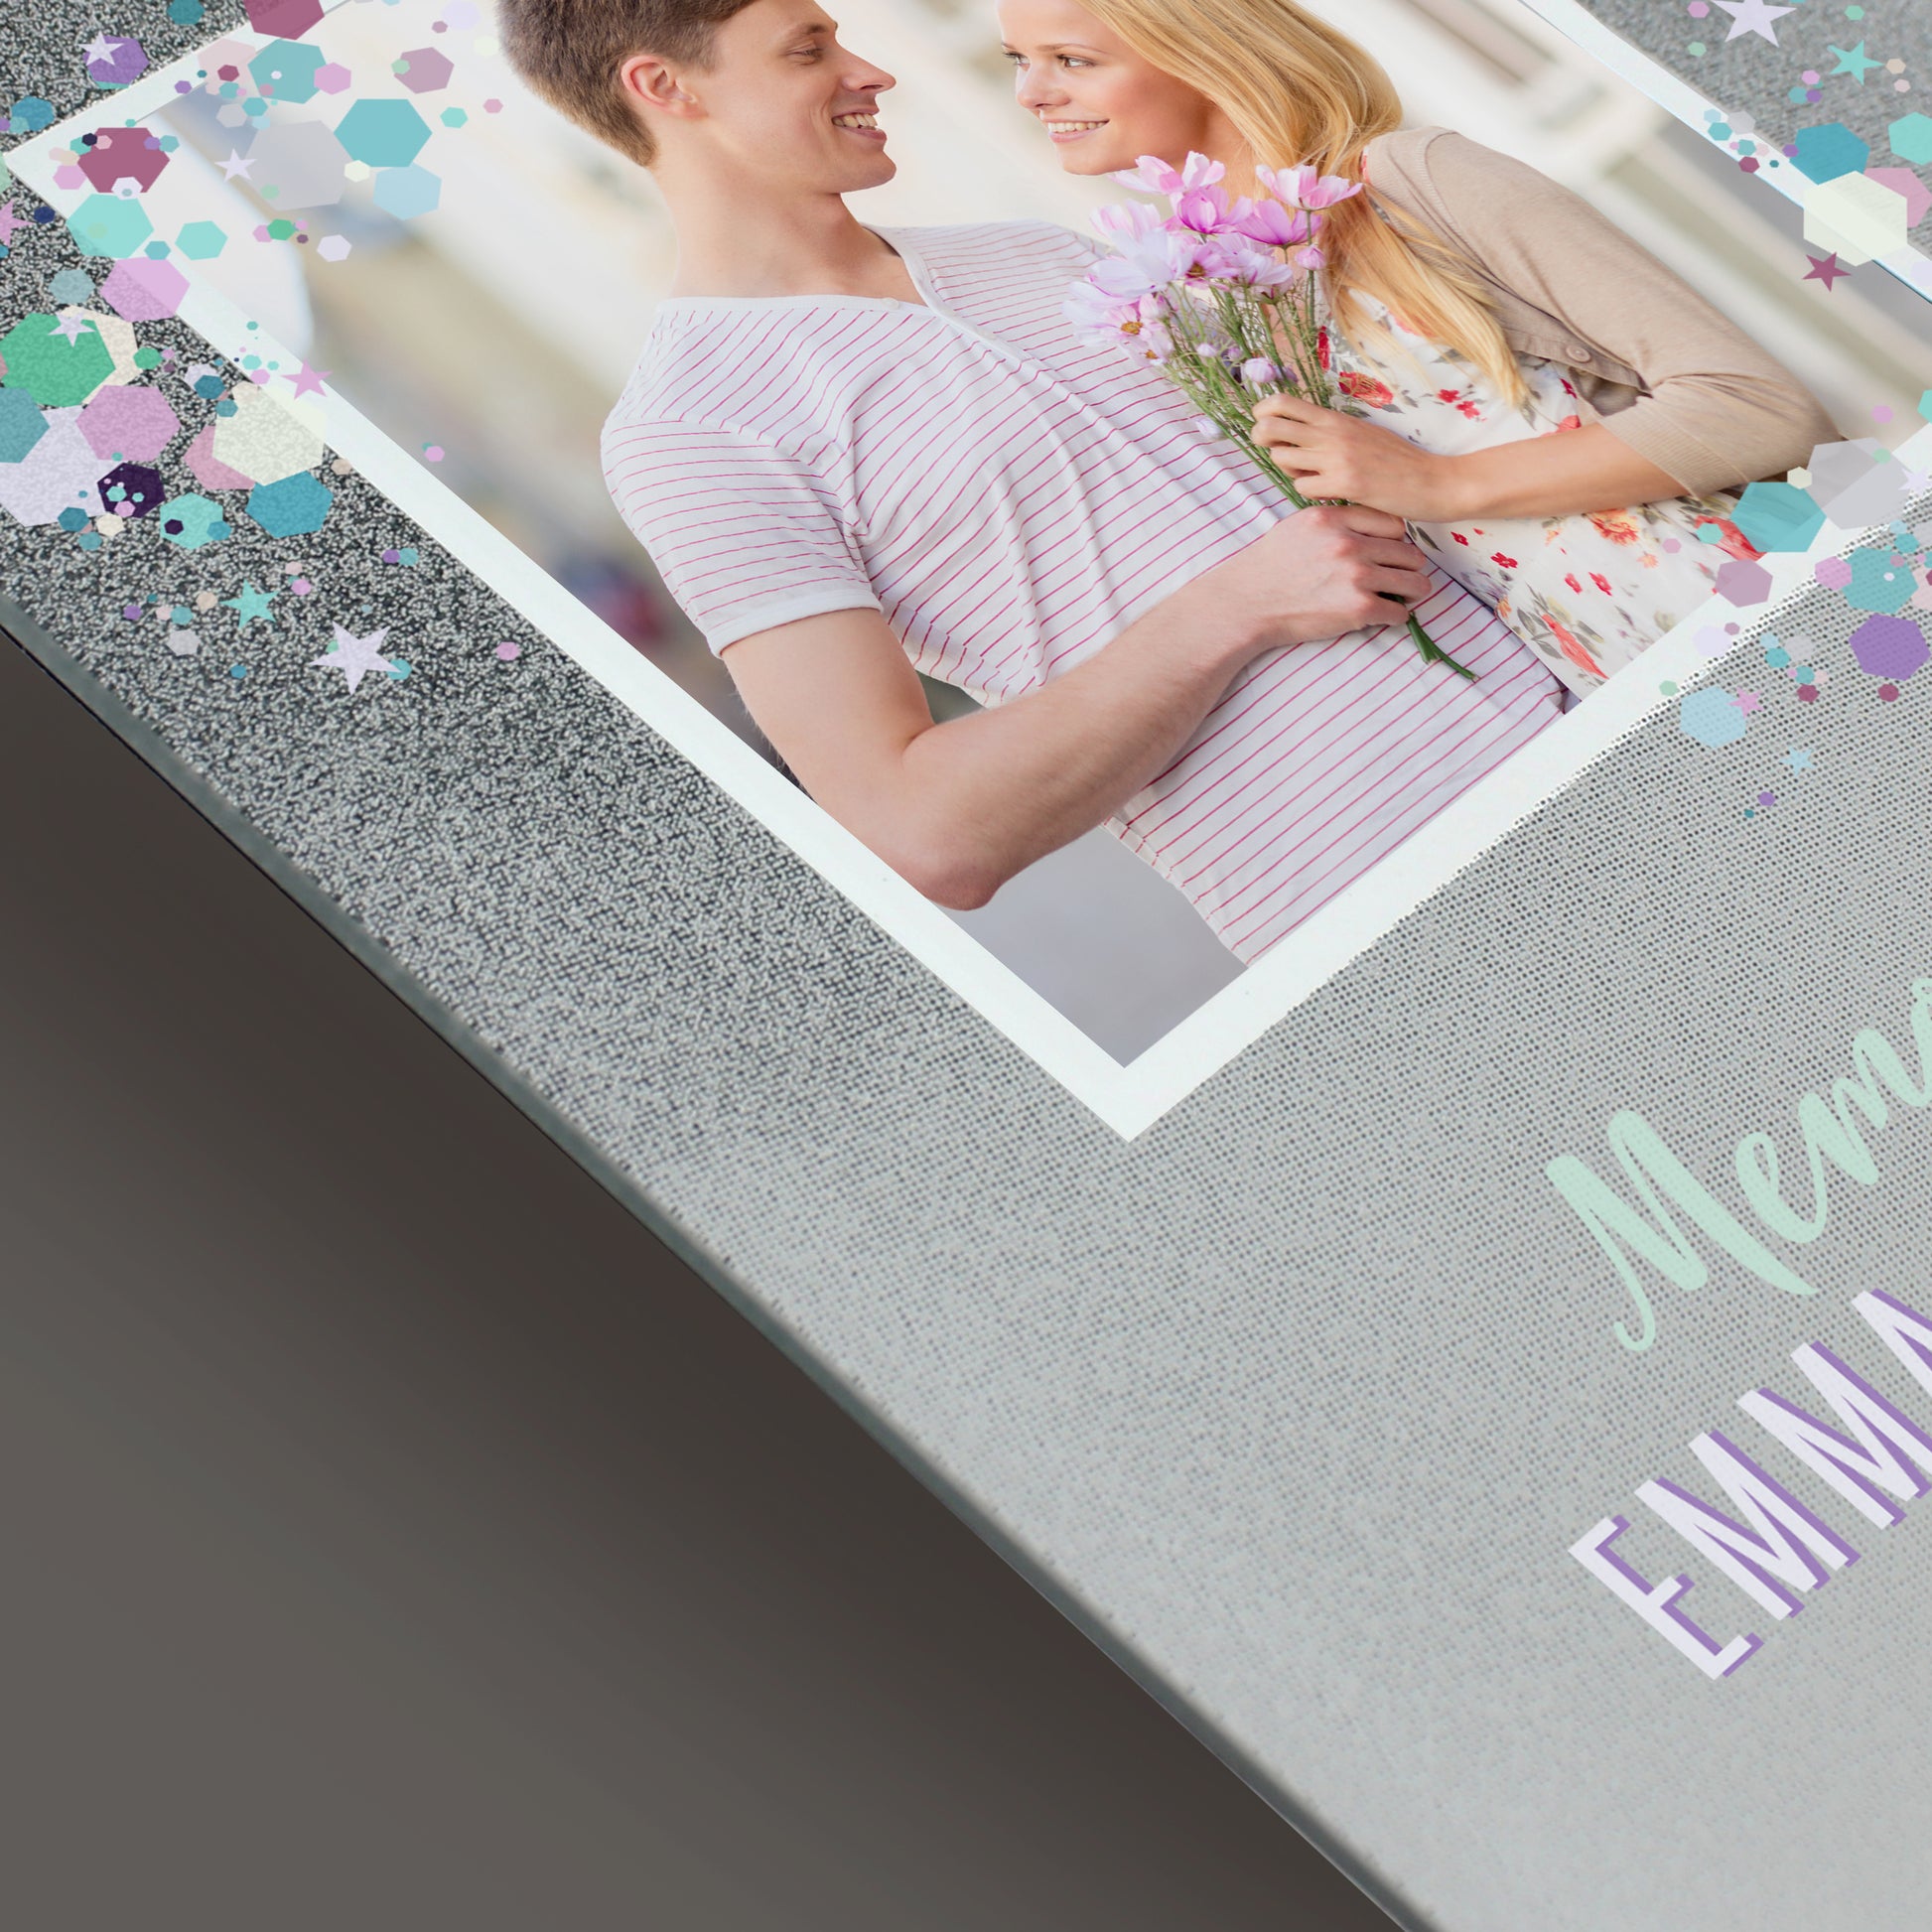 Personalised Festival Style Glitter Glass Photo Frame 4x4